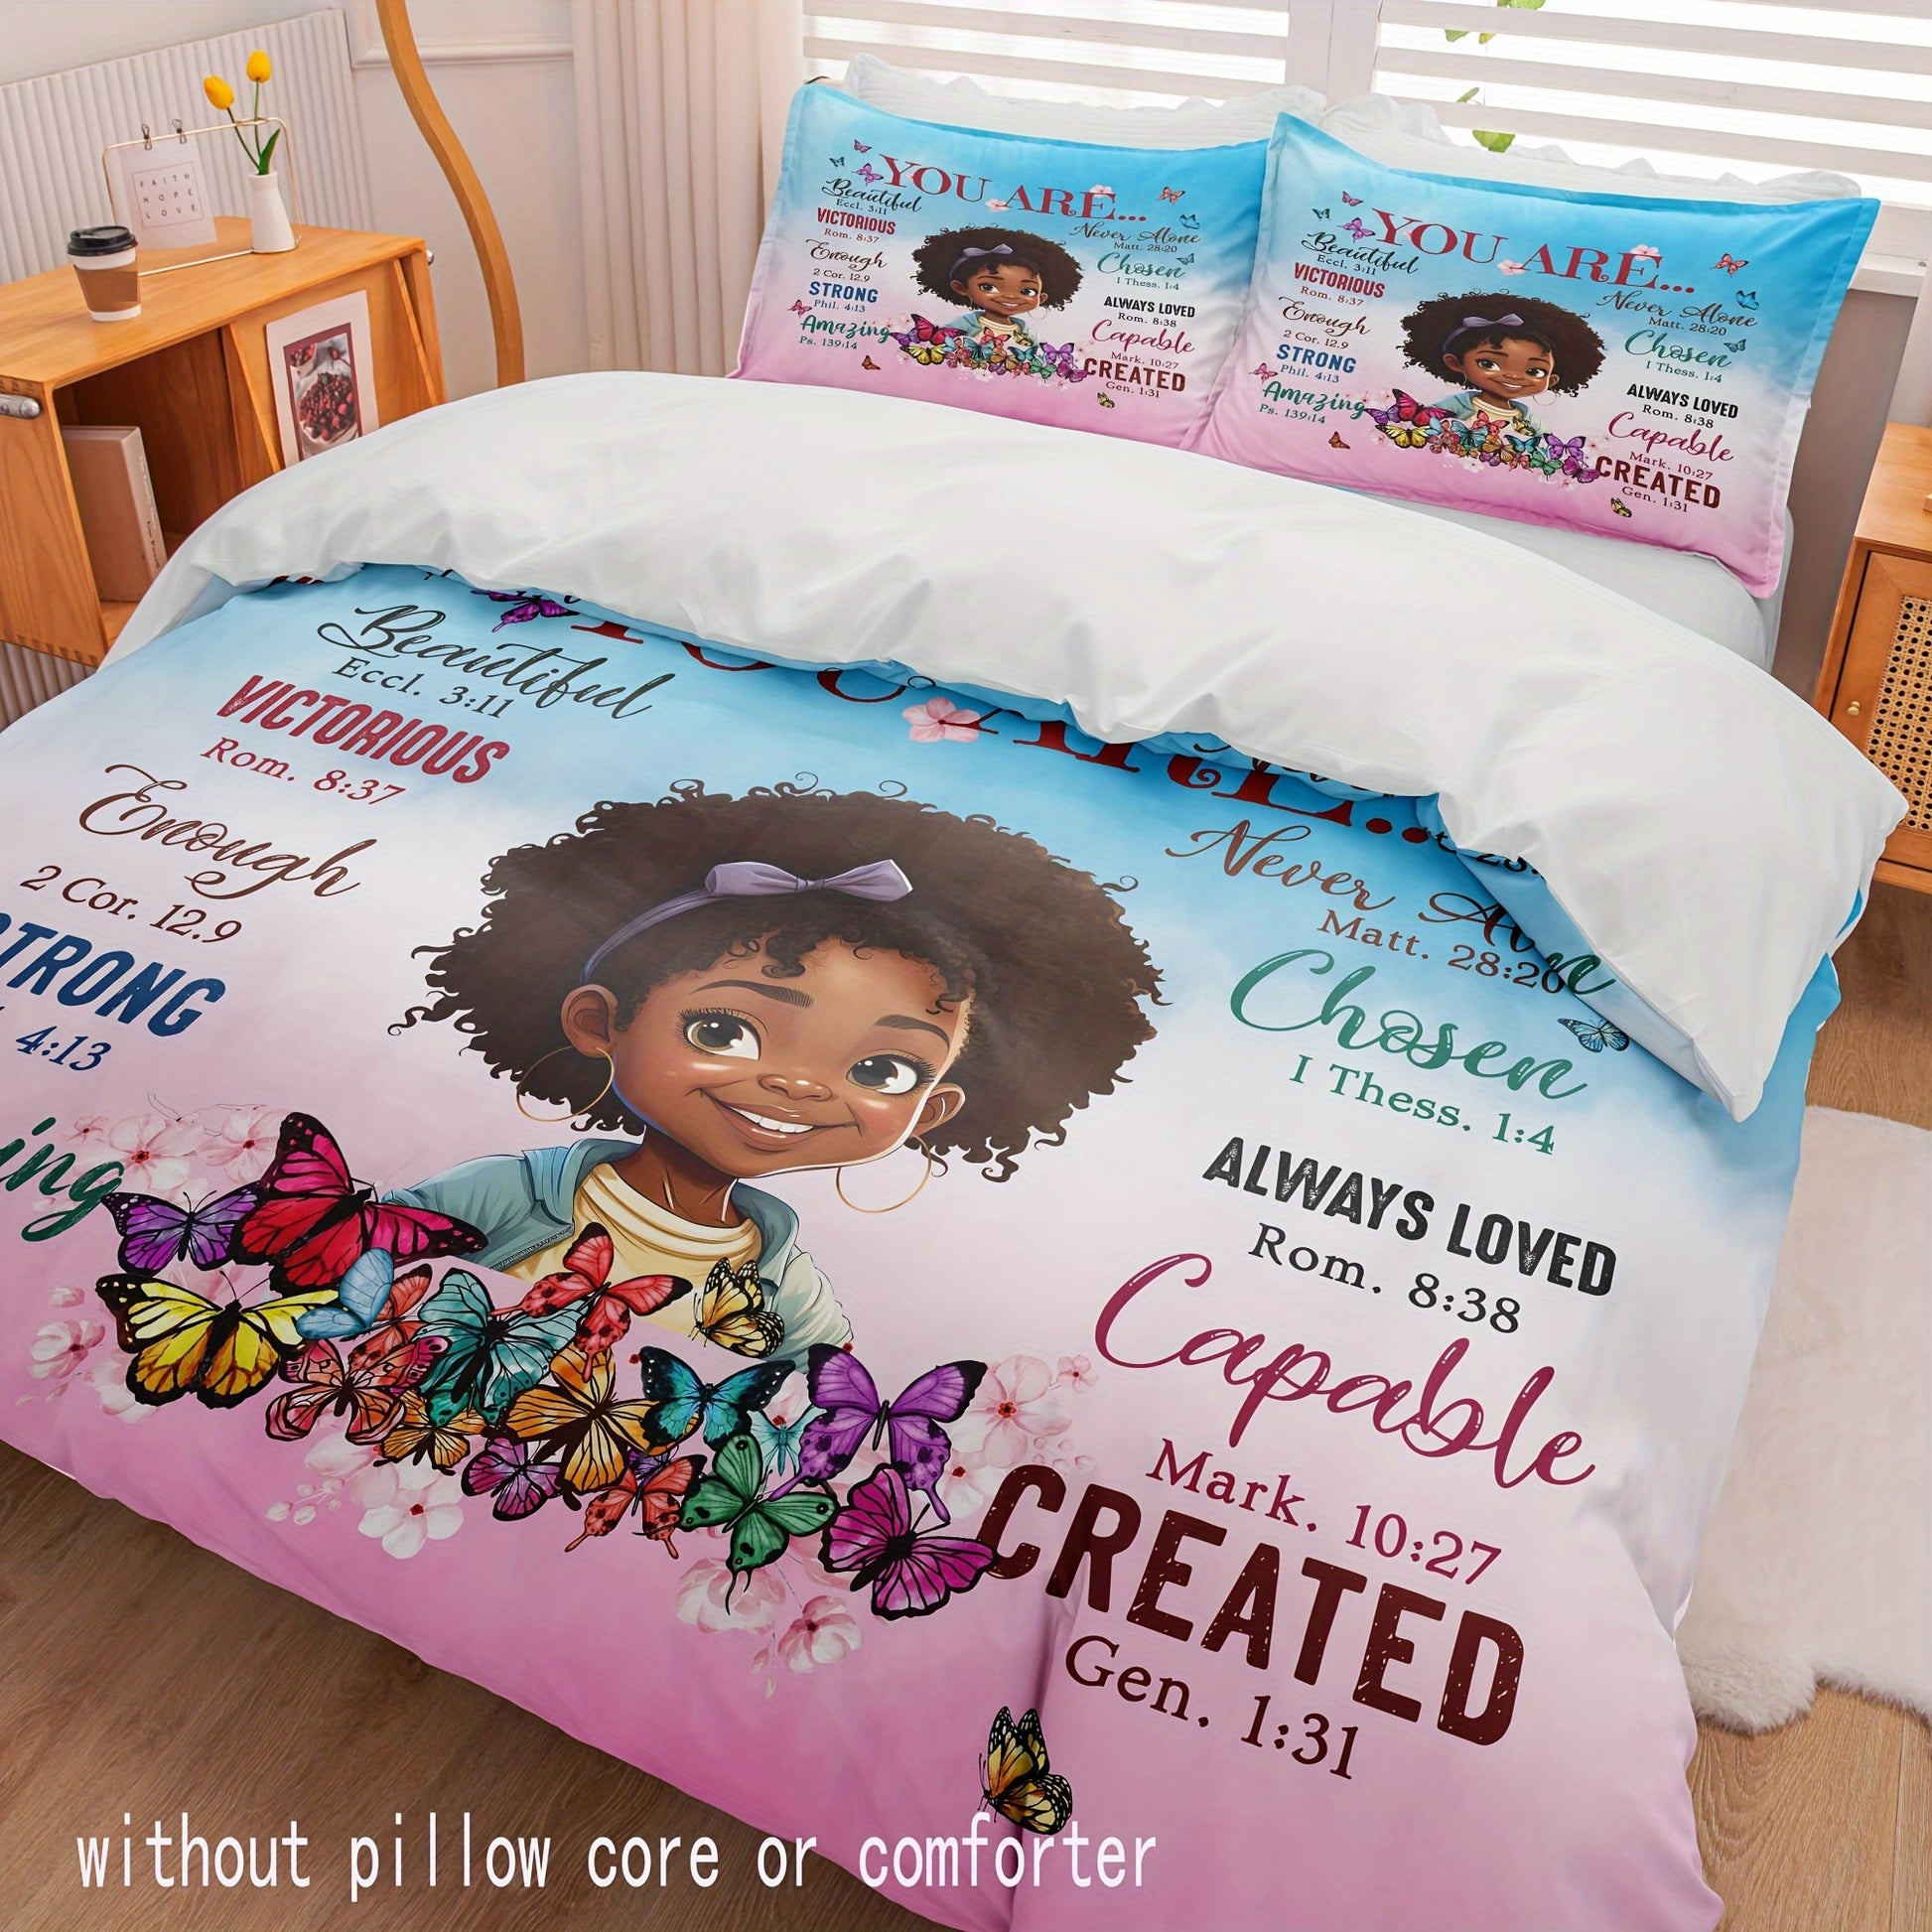 3pcs You Are (positive affirmations for kids) Christian Duvet Cover Set (Core Not Included),, Includes 1 Duvet Cover And 2 Pillowcases claimedbygoddesigns